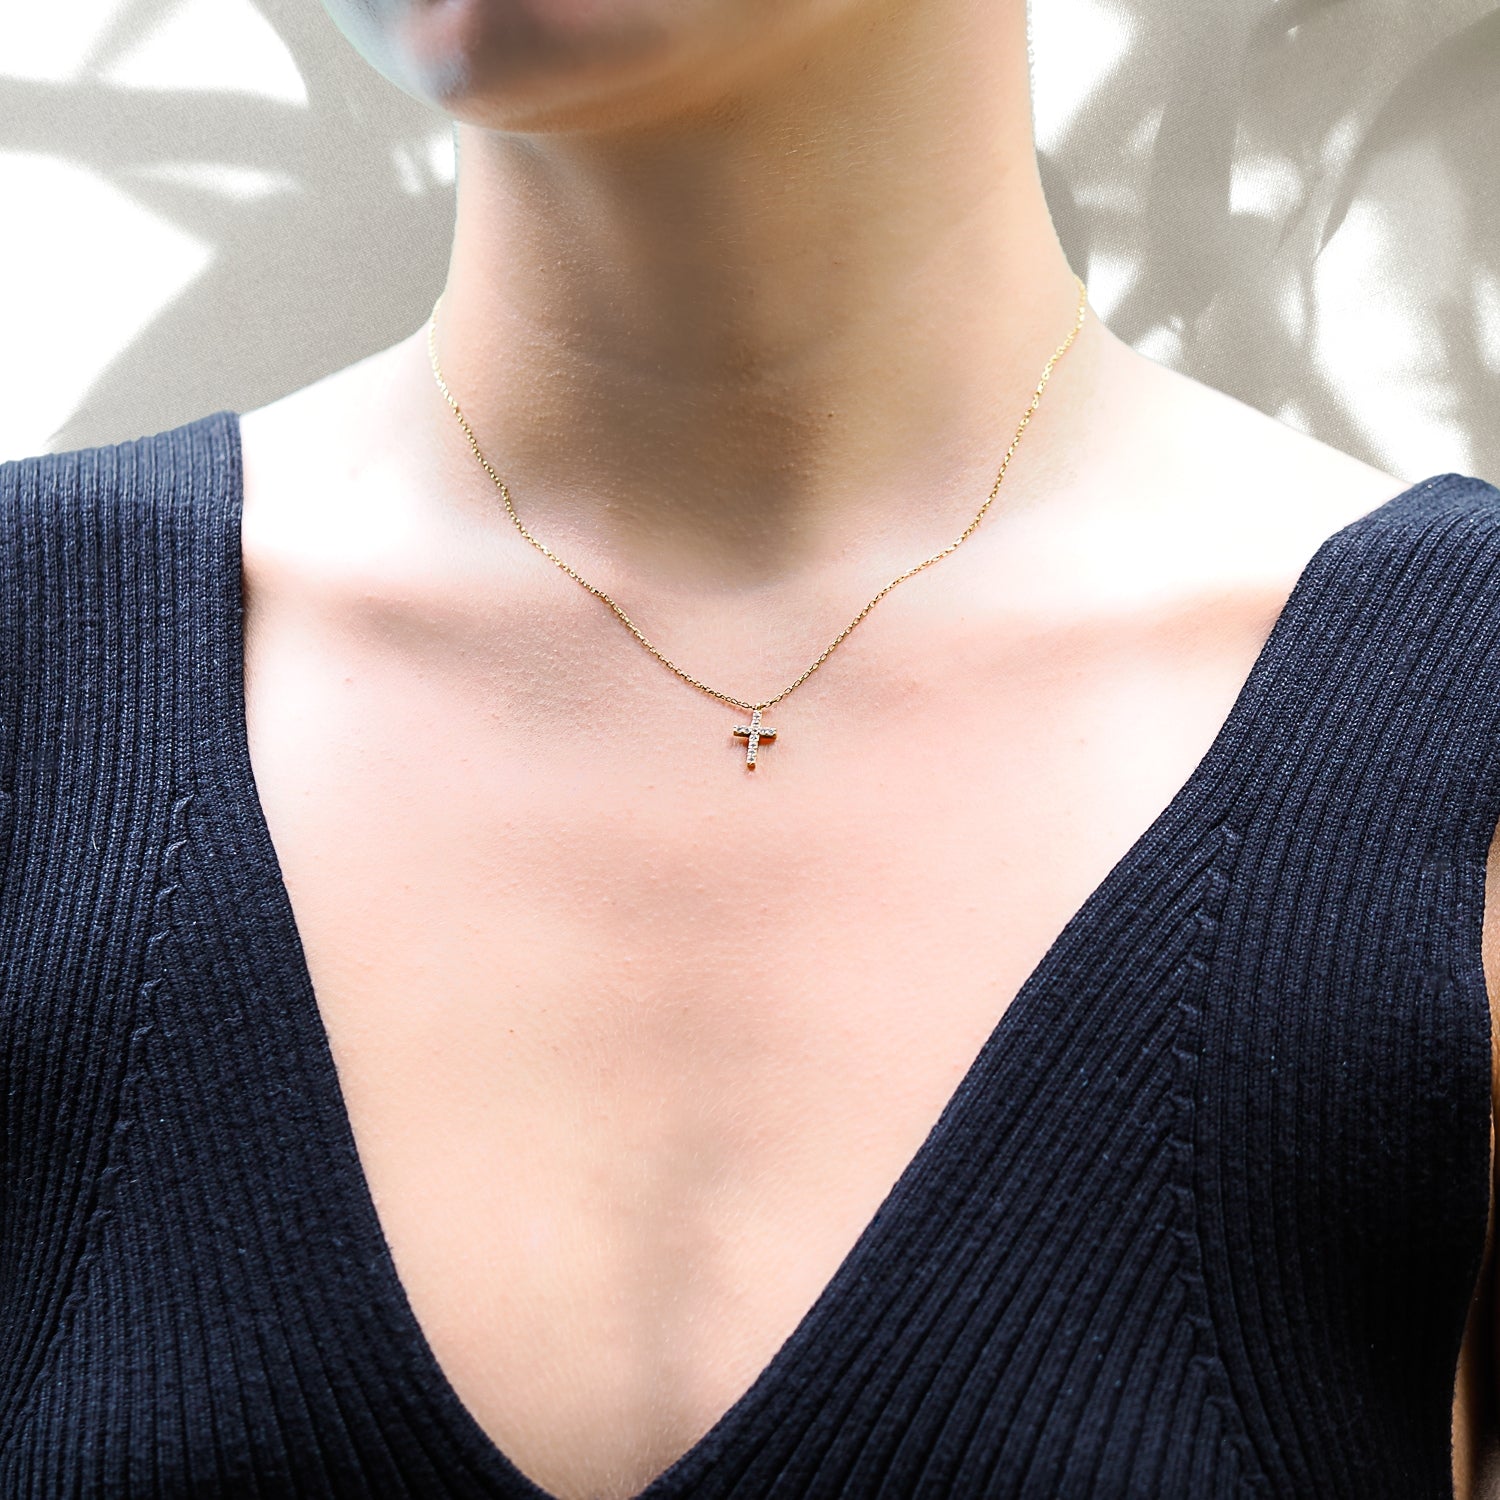 A model wearing the Dainty Diamond Cross Necklace. The necklace beautifully drapes around the neck, showcasing the delicate cross pendant with the shimmering CZ diamond.